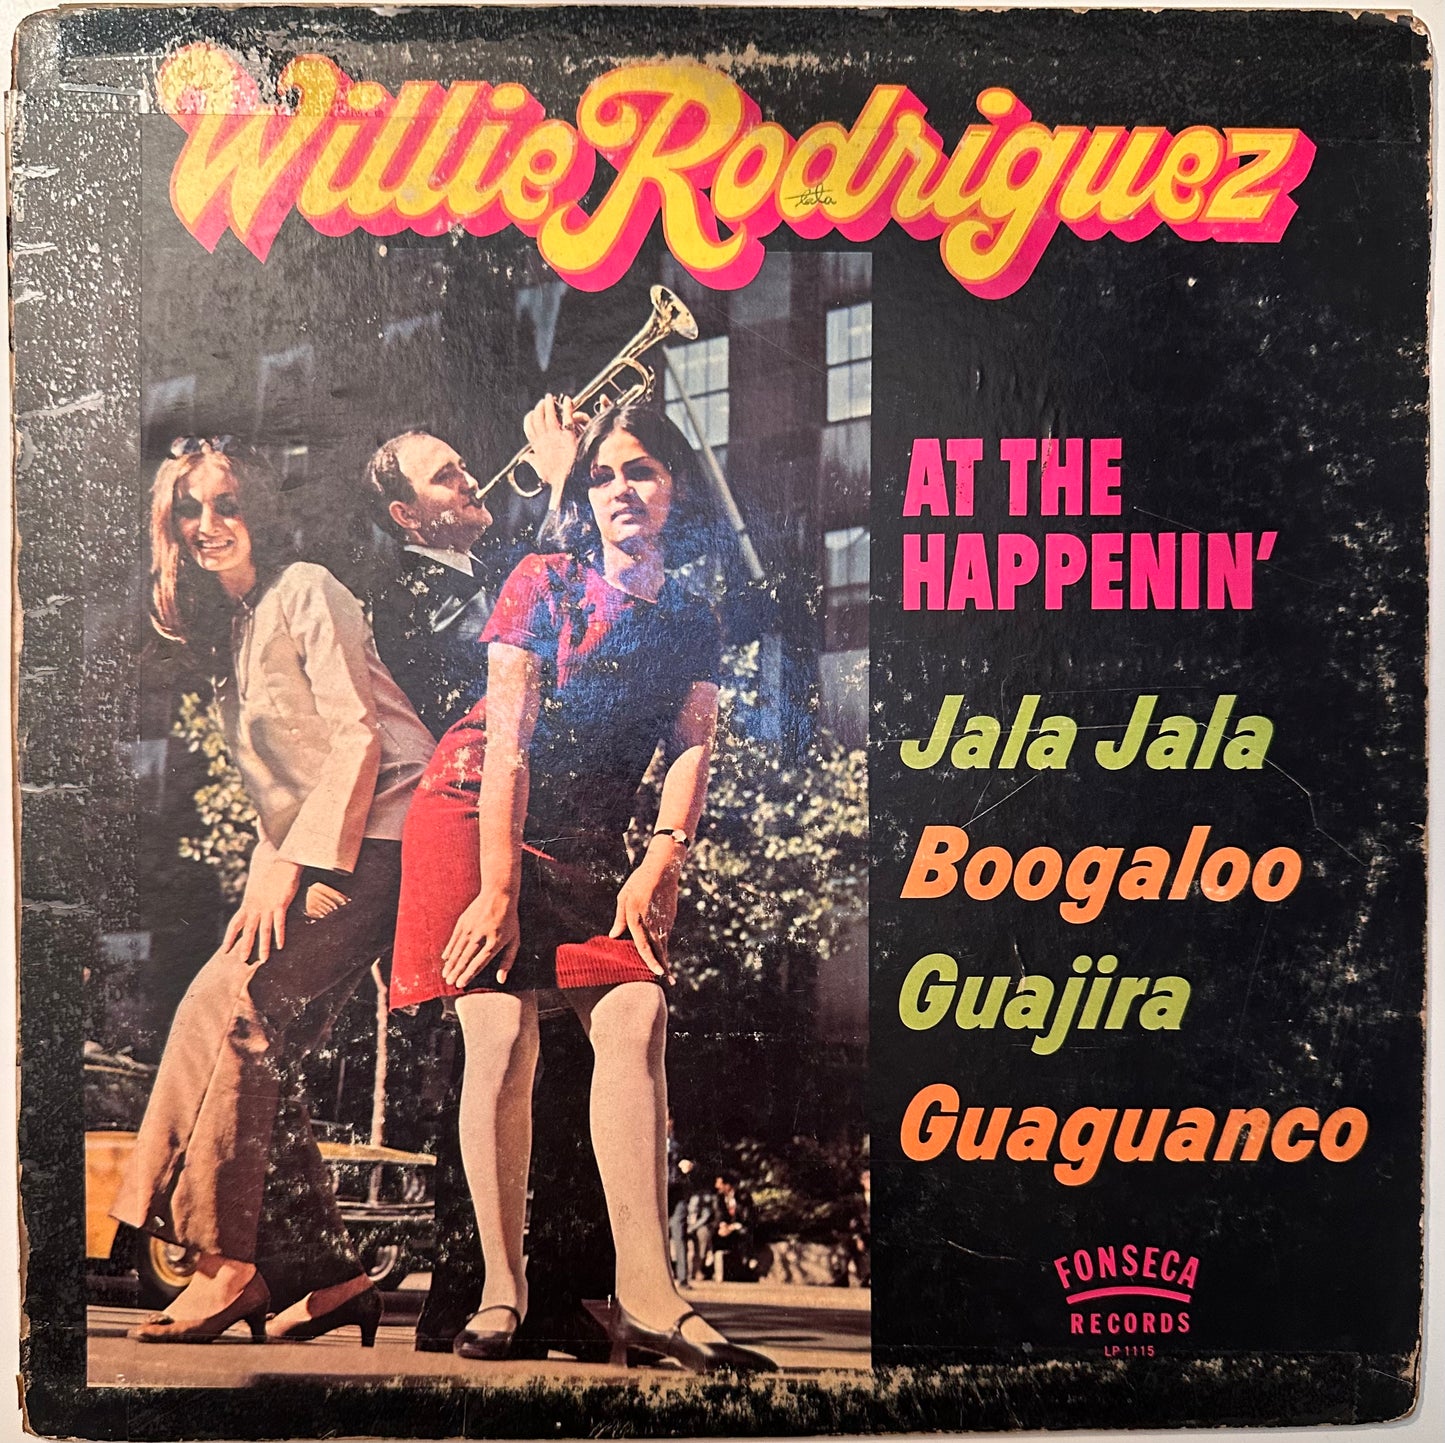 At the happening - Willie Rodriguez